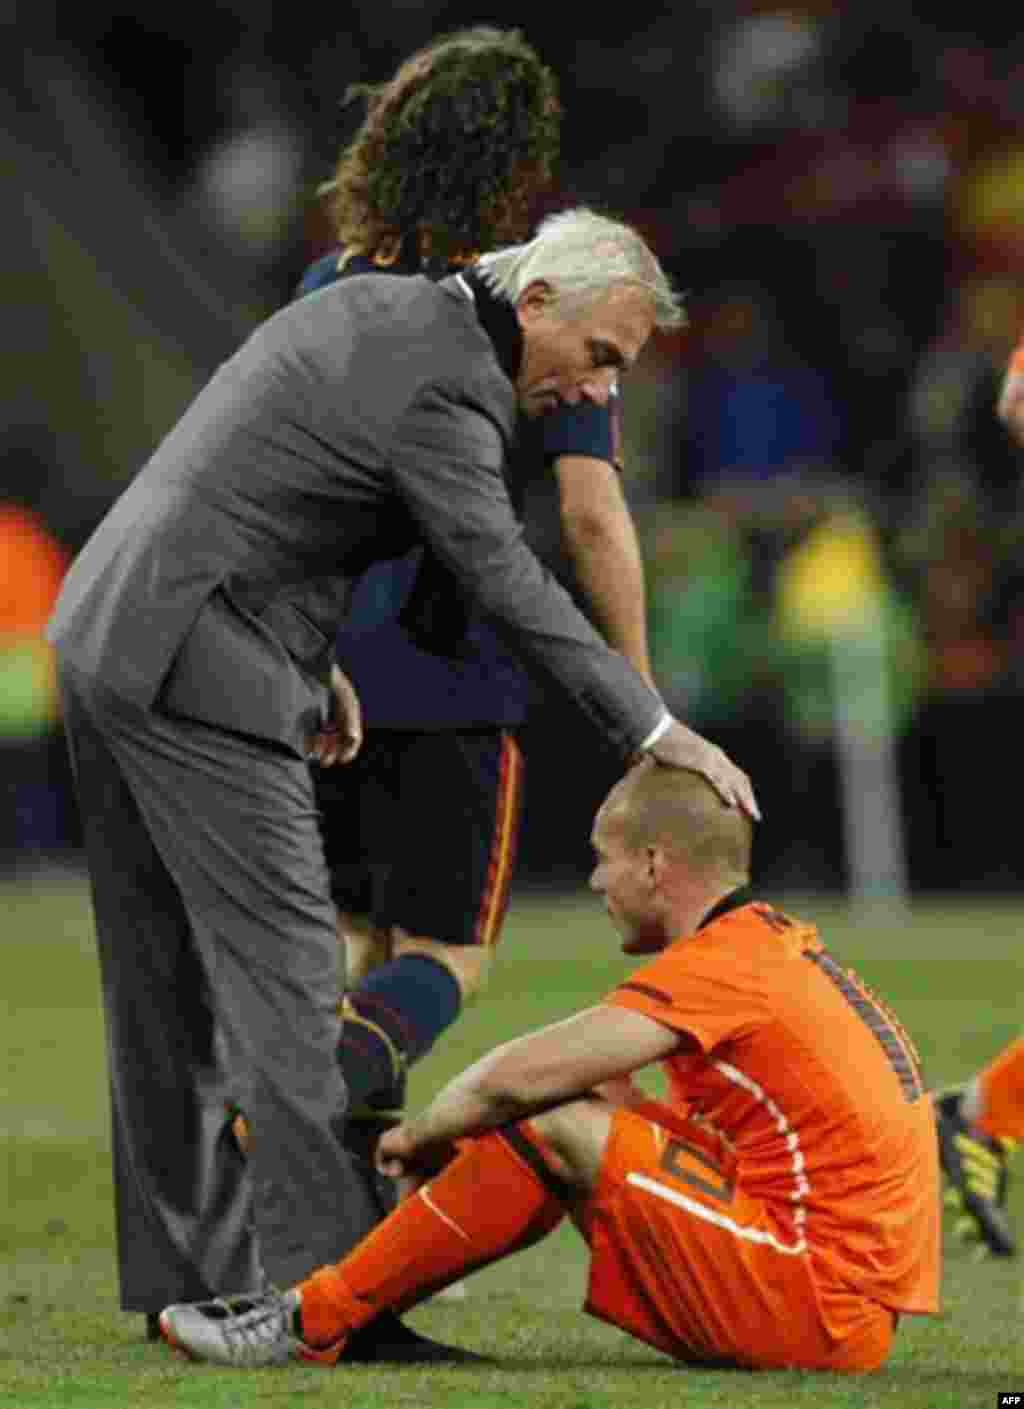 Netherlands head coach Bert van Marwijk, left, comforts Netherlands' Wesley Sneijder, right, following the World Cup final soccer match between the Netherlands and Spain at Soccer City in Johannesburg, South Africa, Sunday, July 11, 2010. (AP Photo/Berna